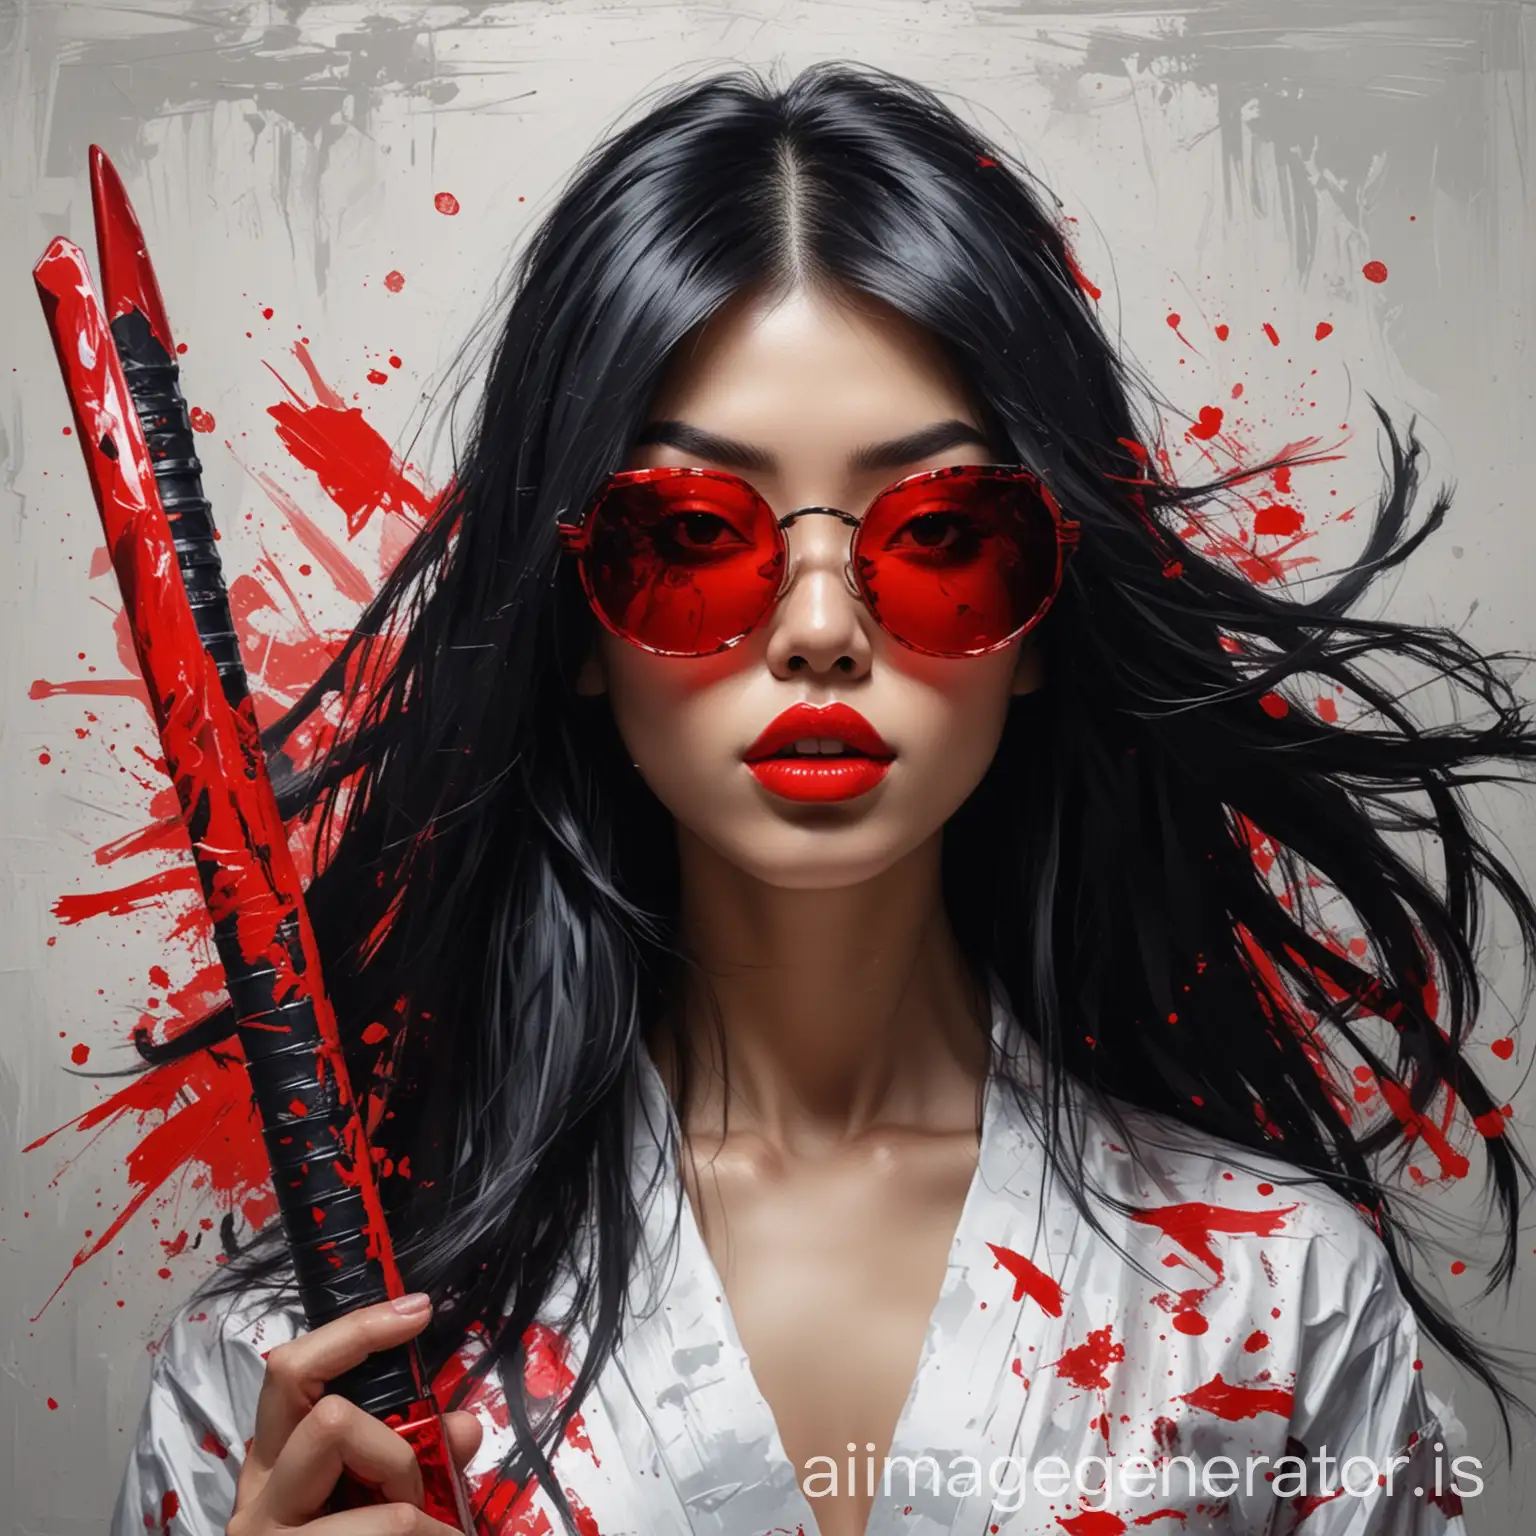 abstract art with no background of a girl having long black shiny hair with big red sunglasses with big red lips wearing and holding a samurai sword